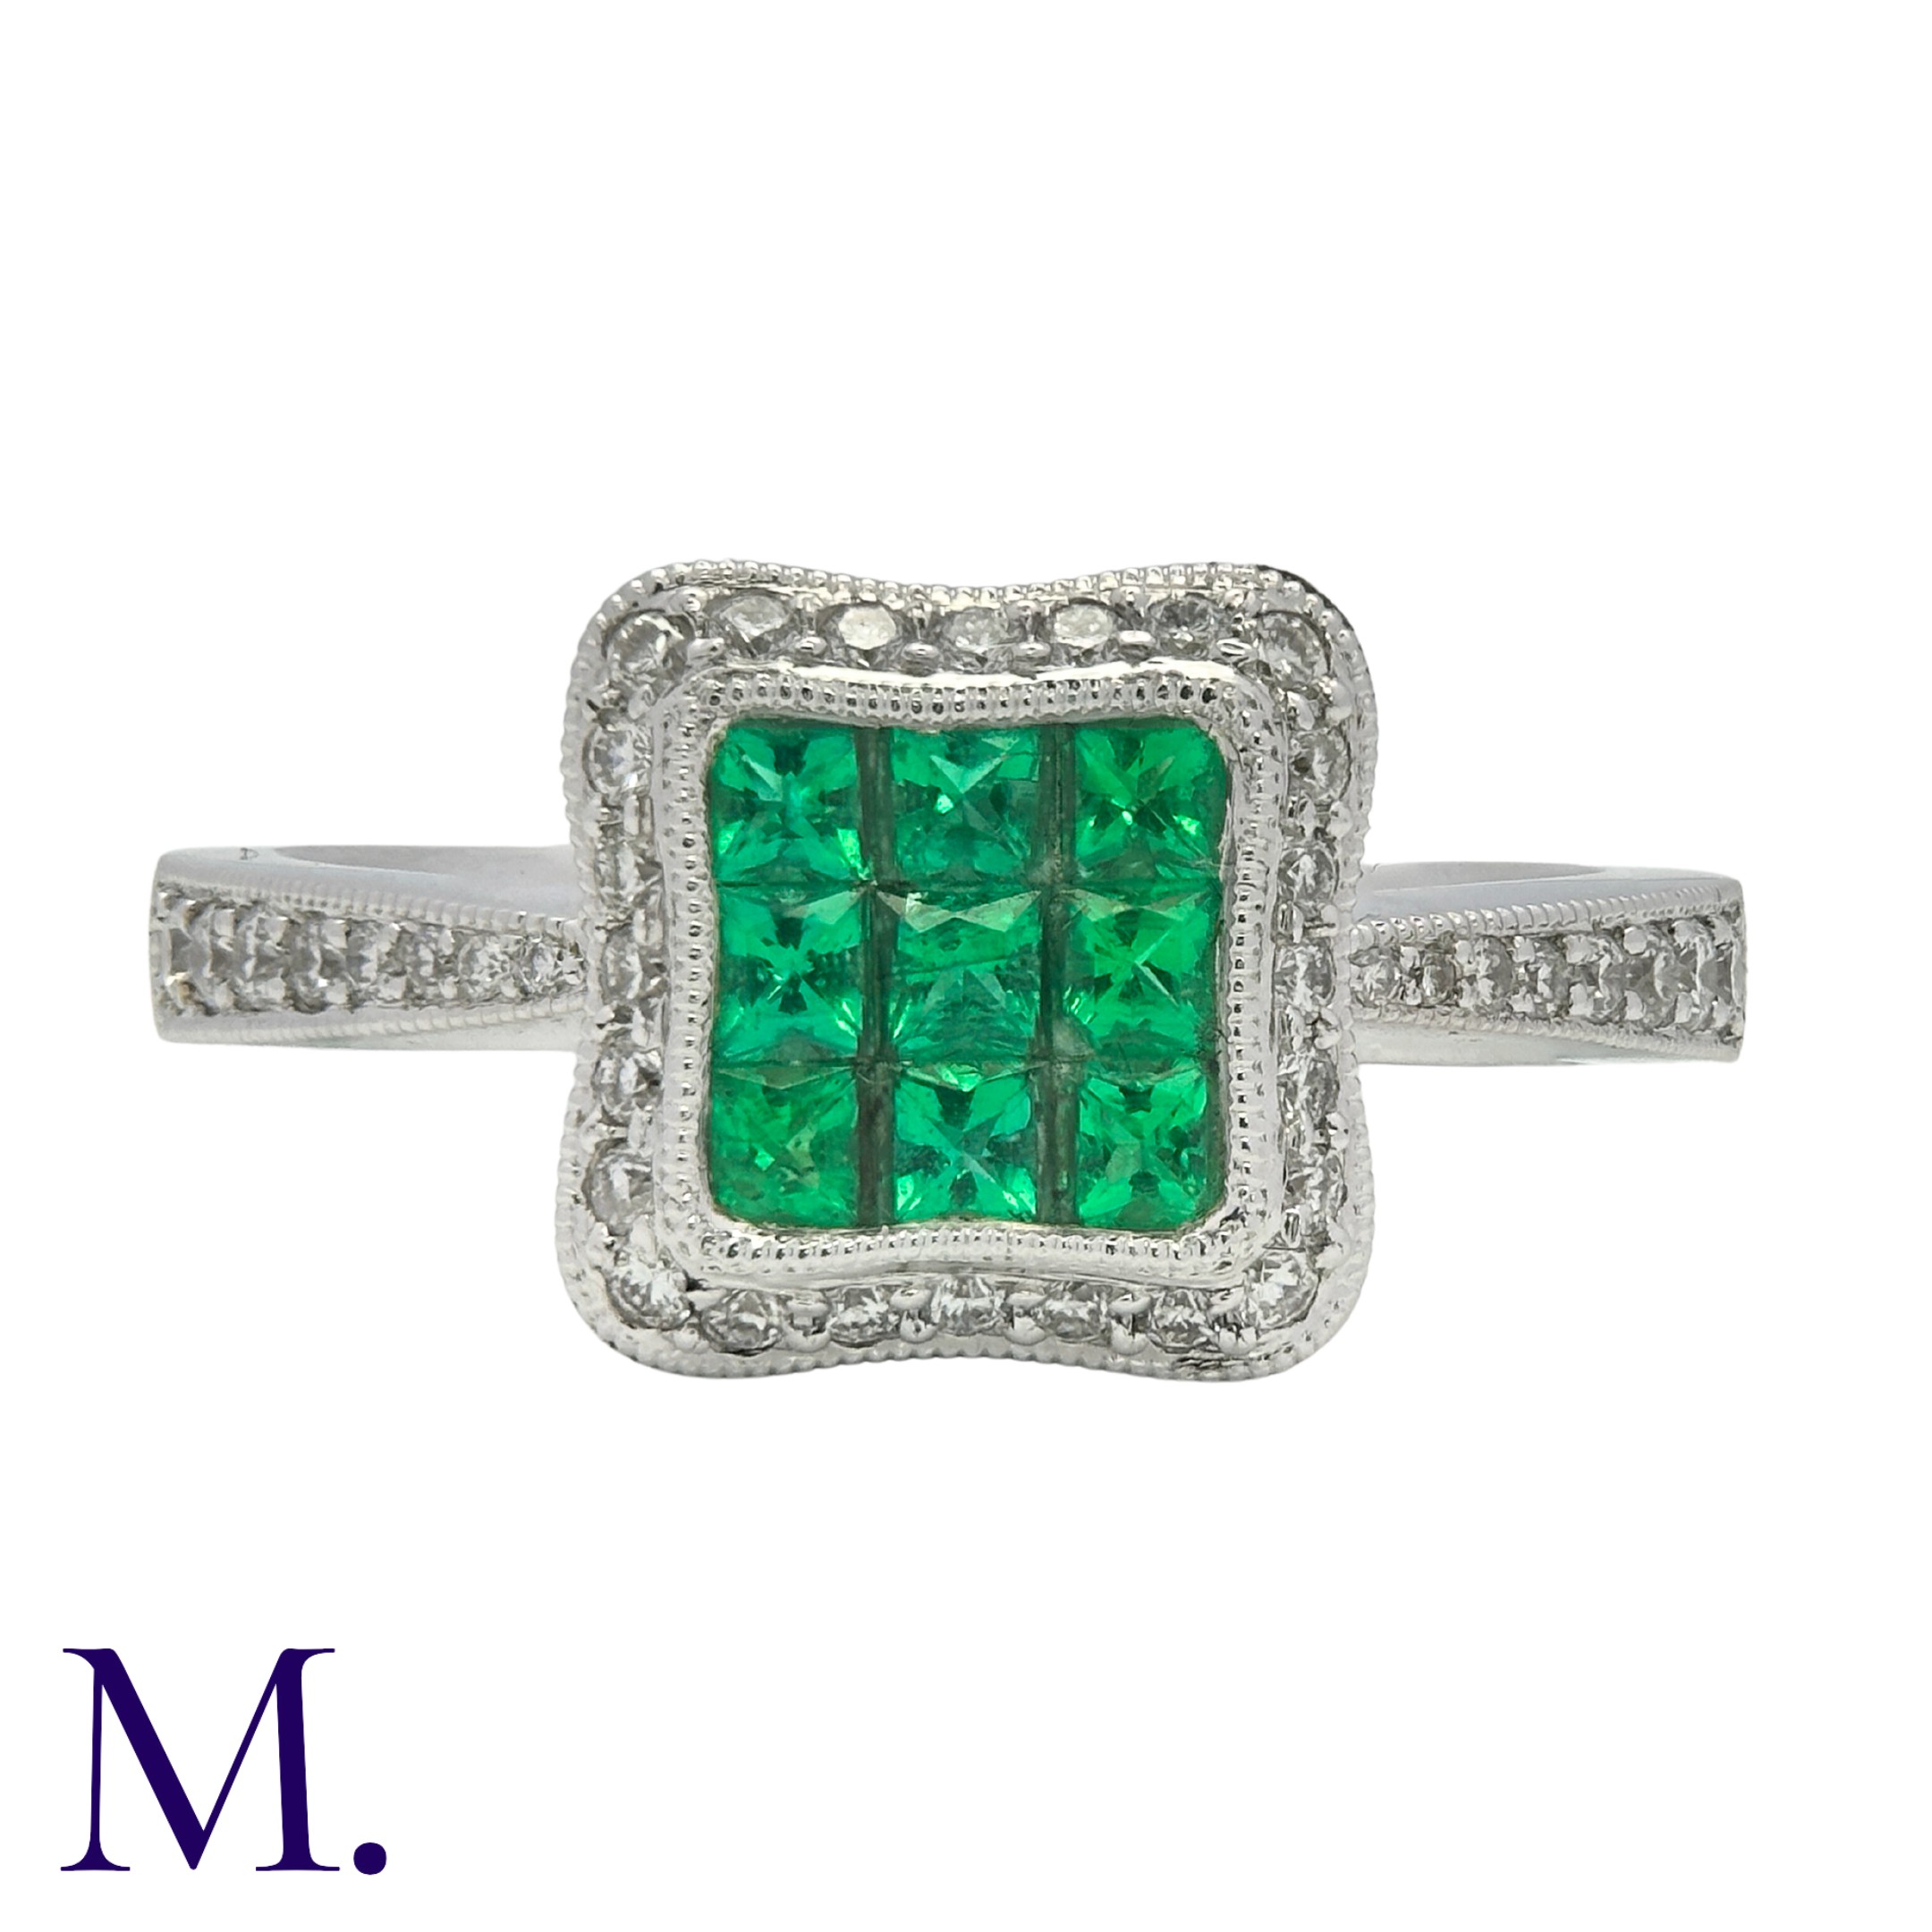 An Emerald and Diamond Ring in 18K white gold, set with nine square cut emeralds in a square panel - Image 2 of 5